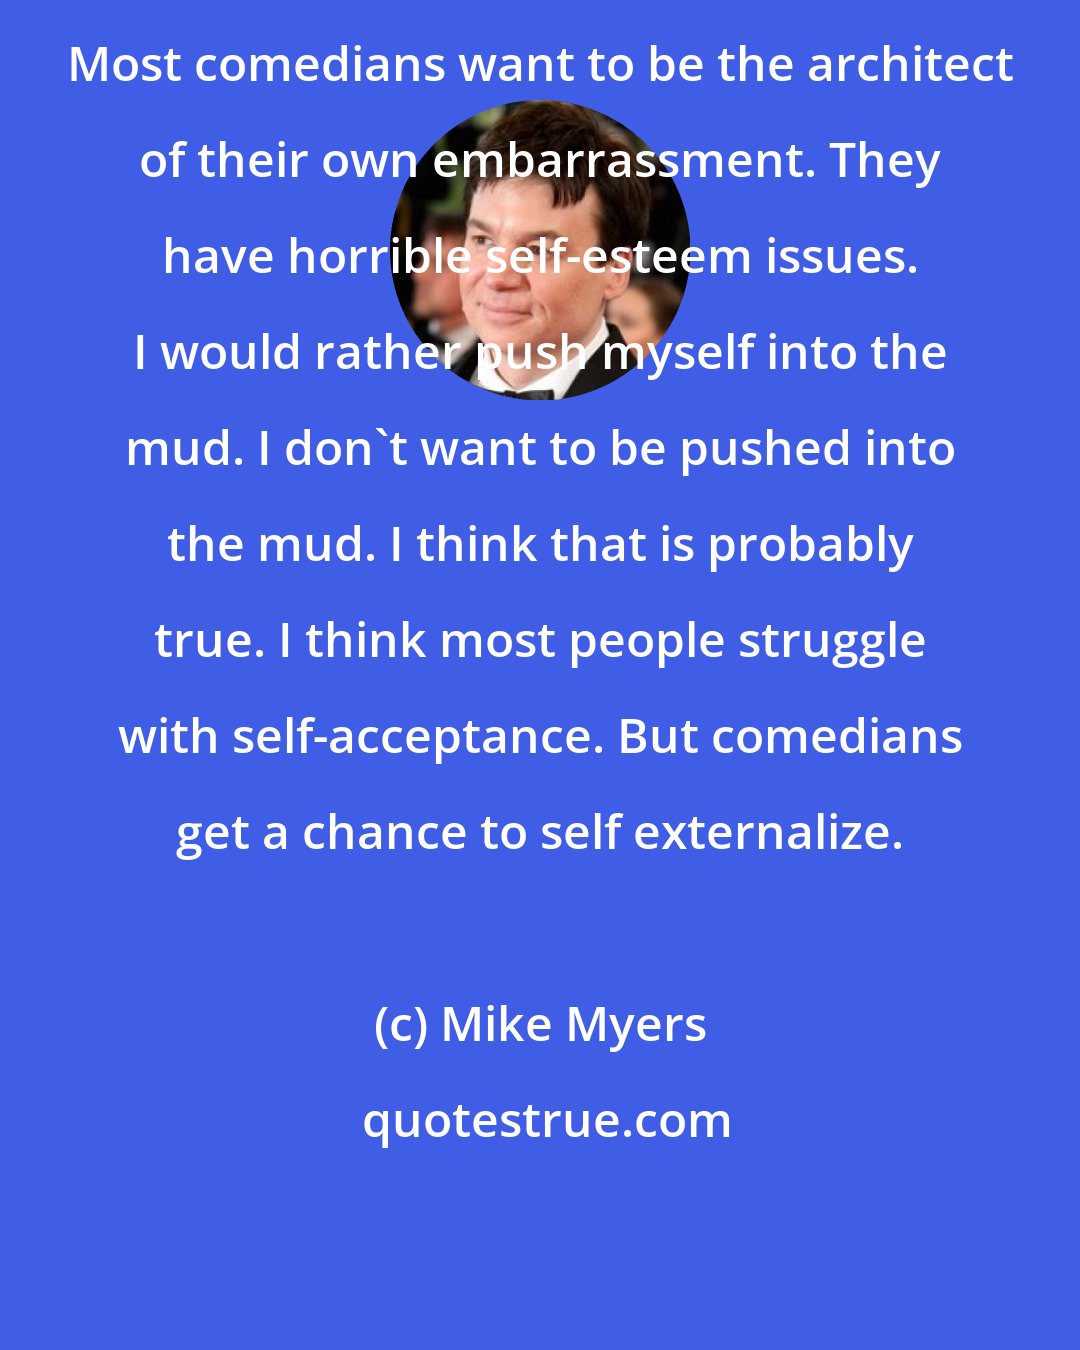 Mike Myers: Most comedians want to be the architect of their own embarrassment. They have horrible self-esteem issues. I would rather push myself into the mud. I don't want to be pushed into the mud. I think that is probably true. I think most people struggle with self-acceptance. But comedians get a chance to self externalize.